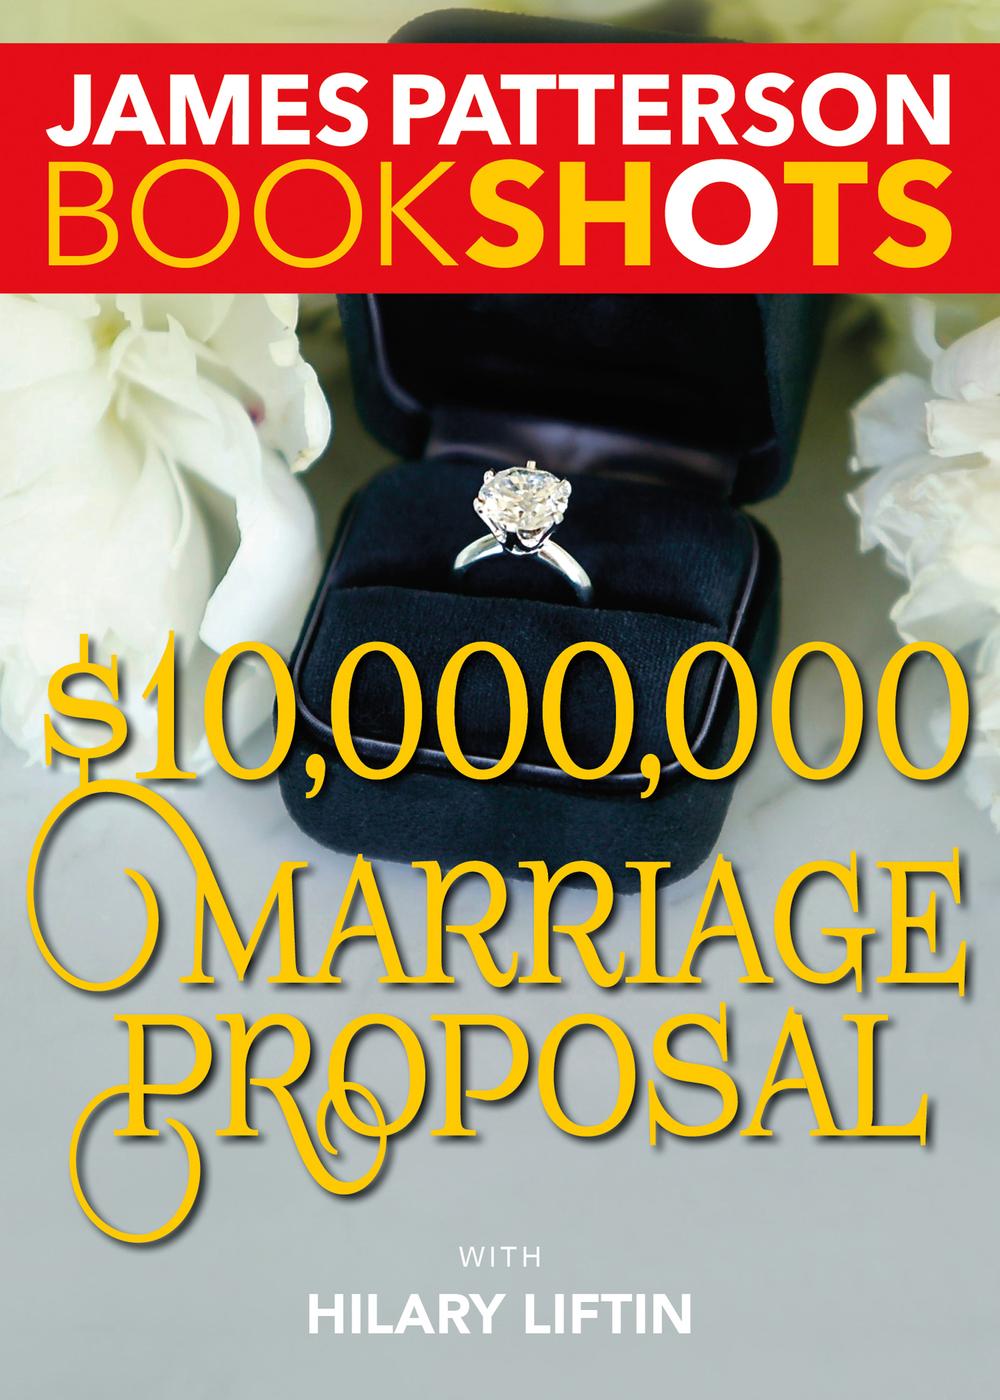 $10,000,000 Marriage Proposal (2016) by James Patterson